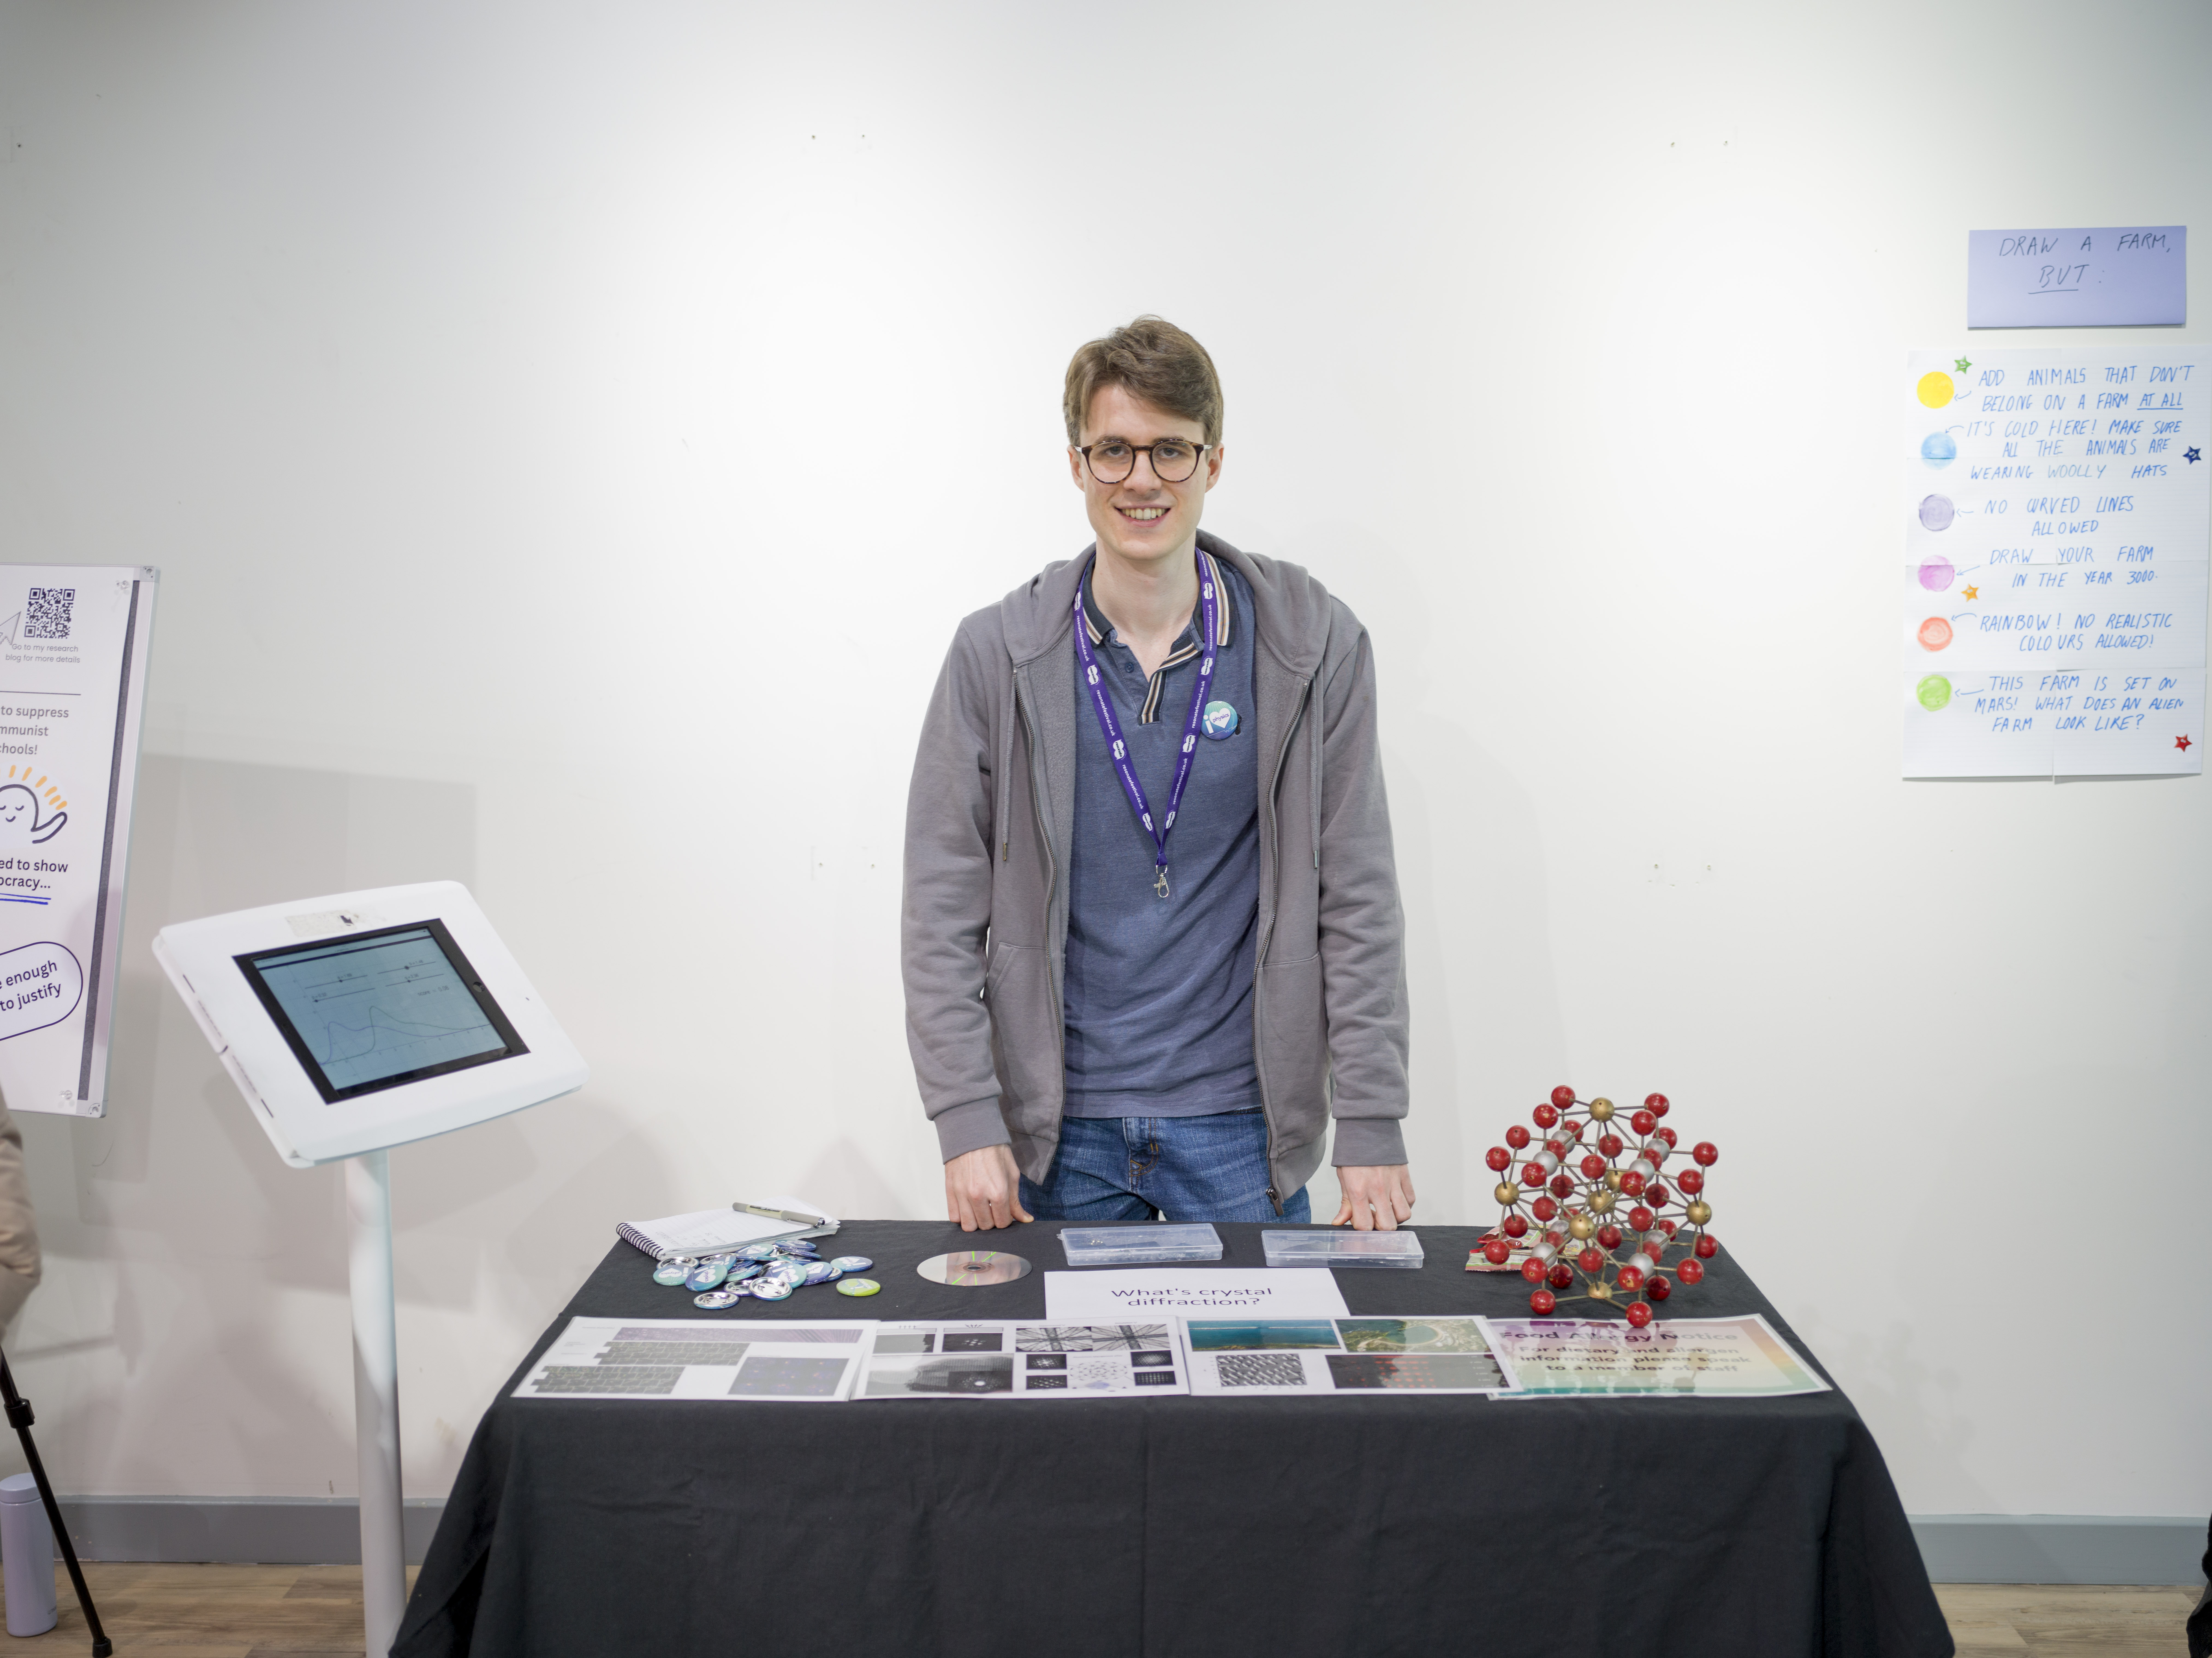 A student stands behind a table with a molecular model on it, lots of pictures and an iPad.